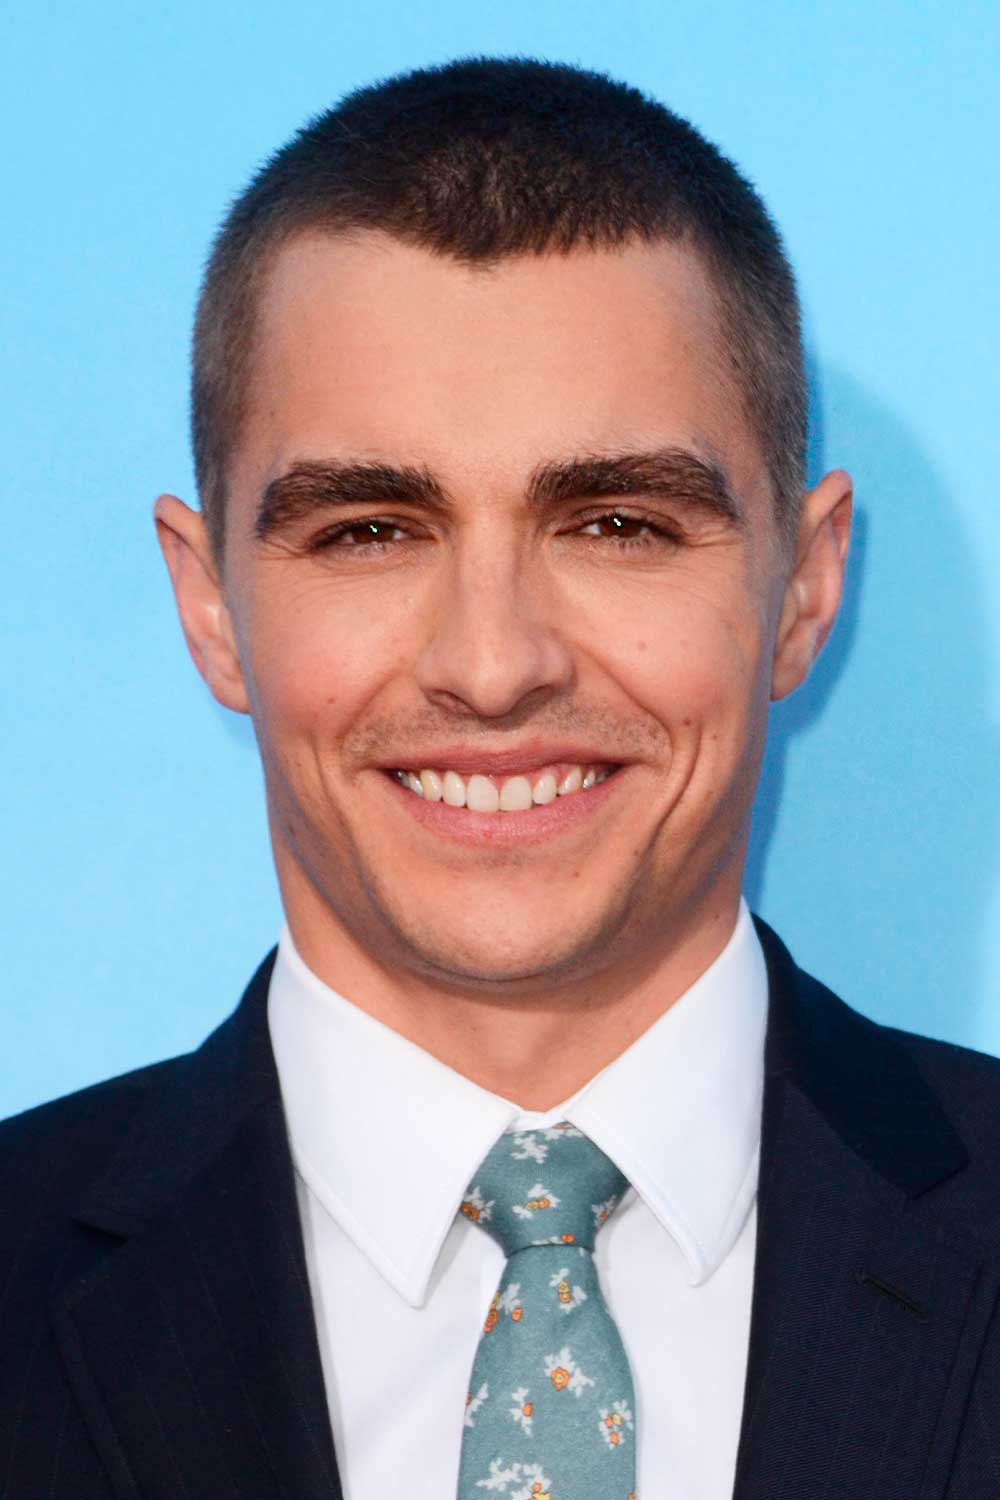 Number 5 Haircut Dave Franco #haircutnumbers #hairclippersizes